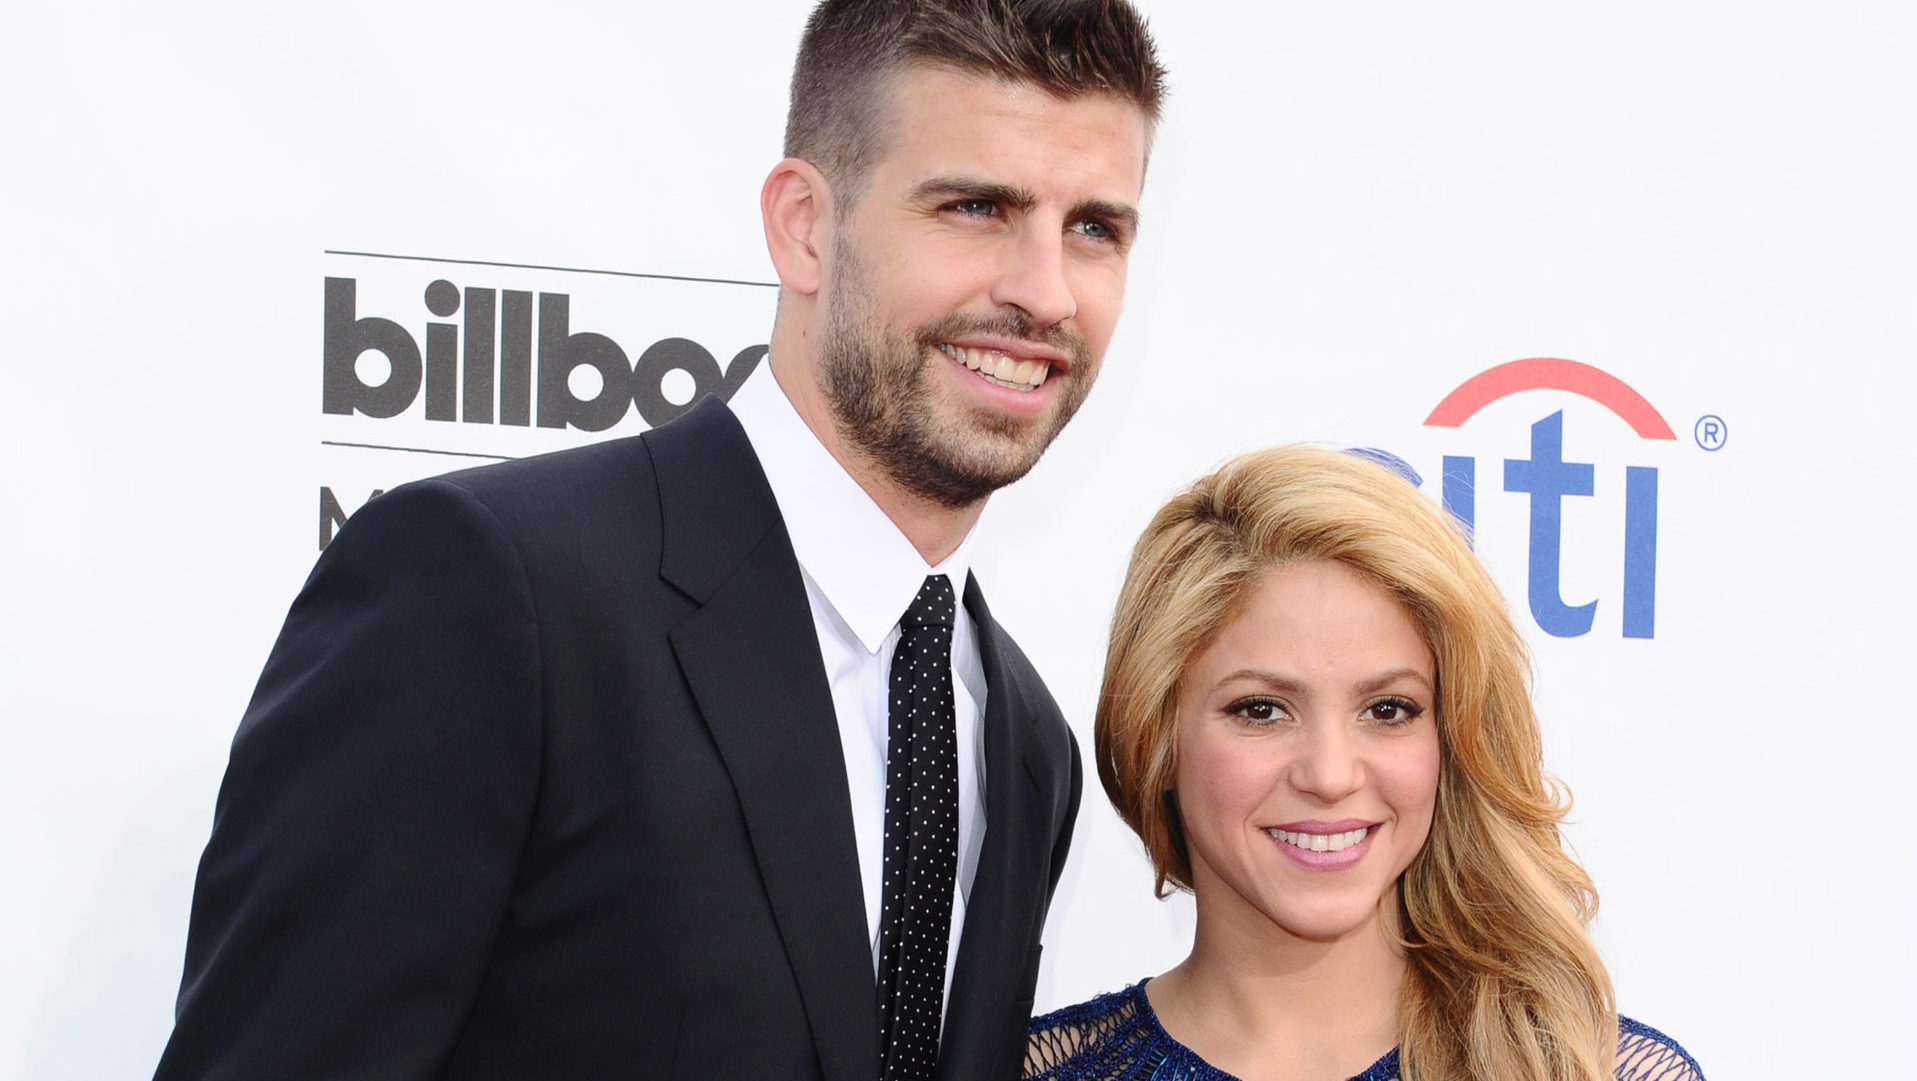 In divorce proceedings, Shakira and Pique are contesting… a private jet worth 20 million euros